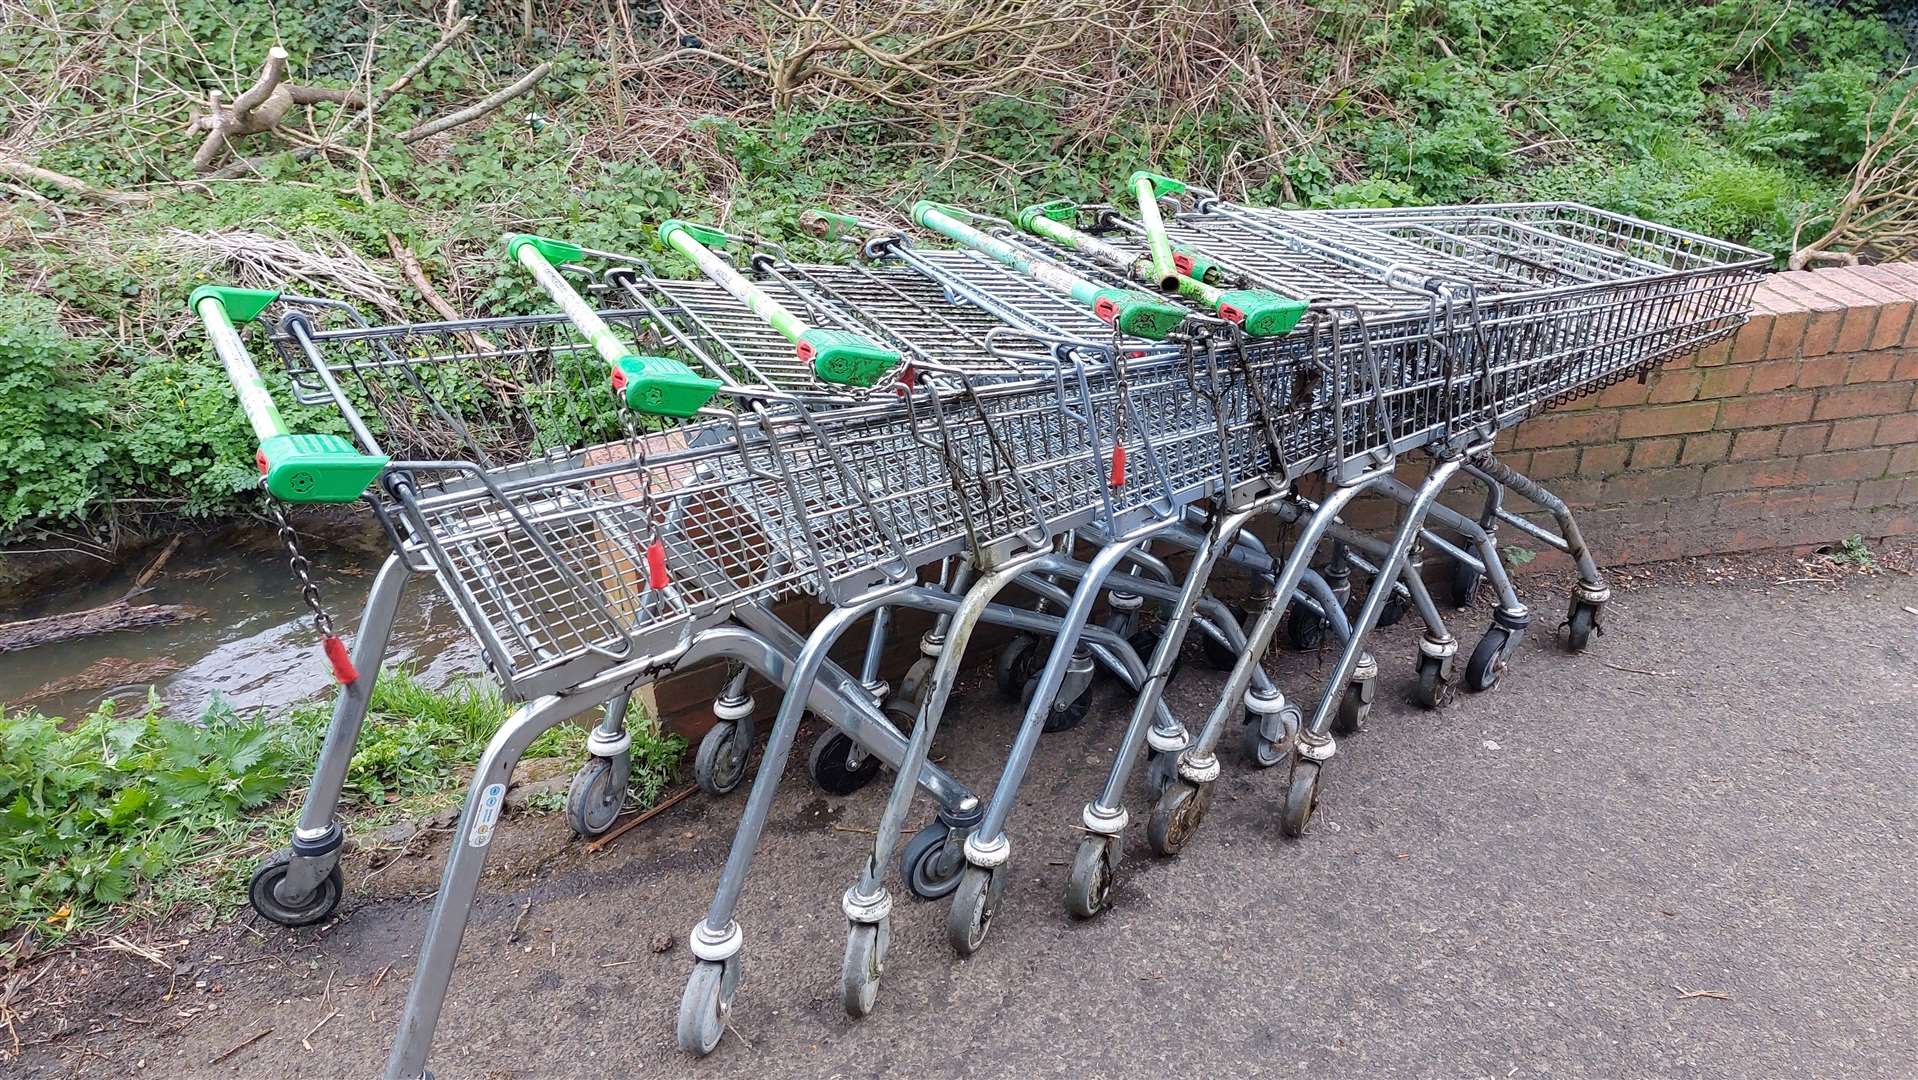 The South Willesborough litter pickers clean up the river Stour once a month. They pull out up to 15 Asda shopping trollies each time